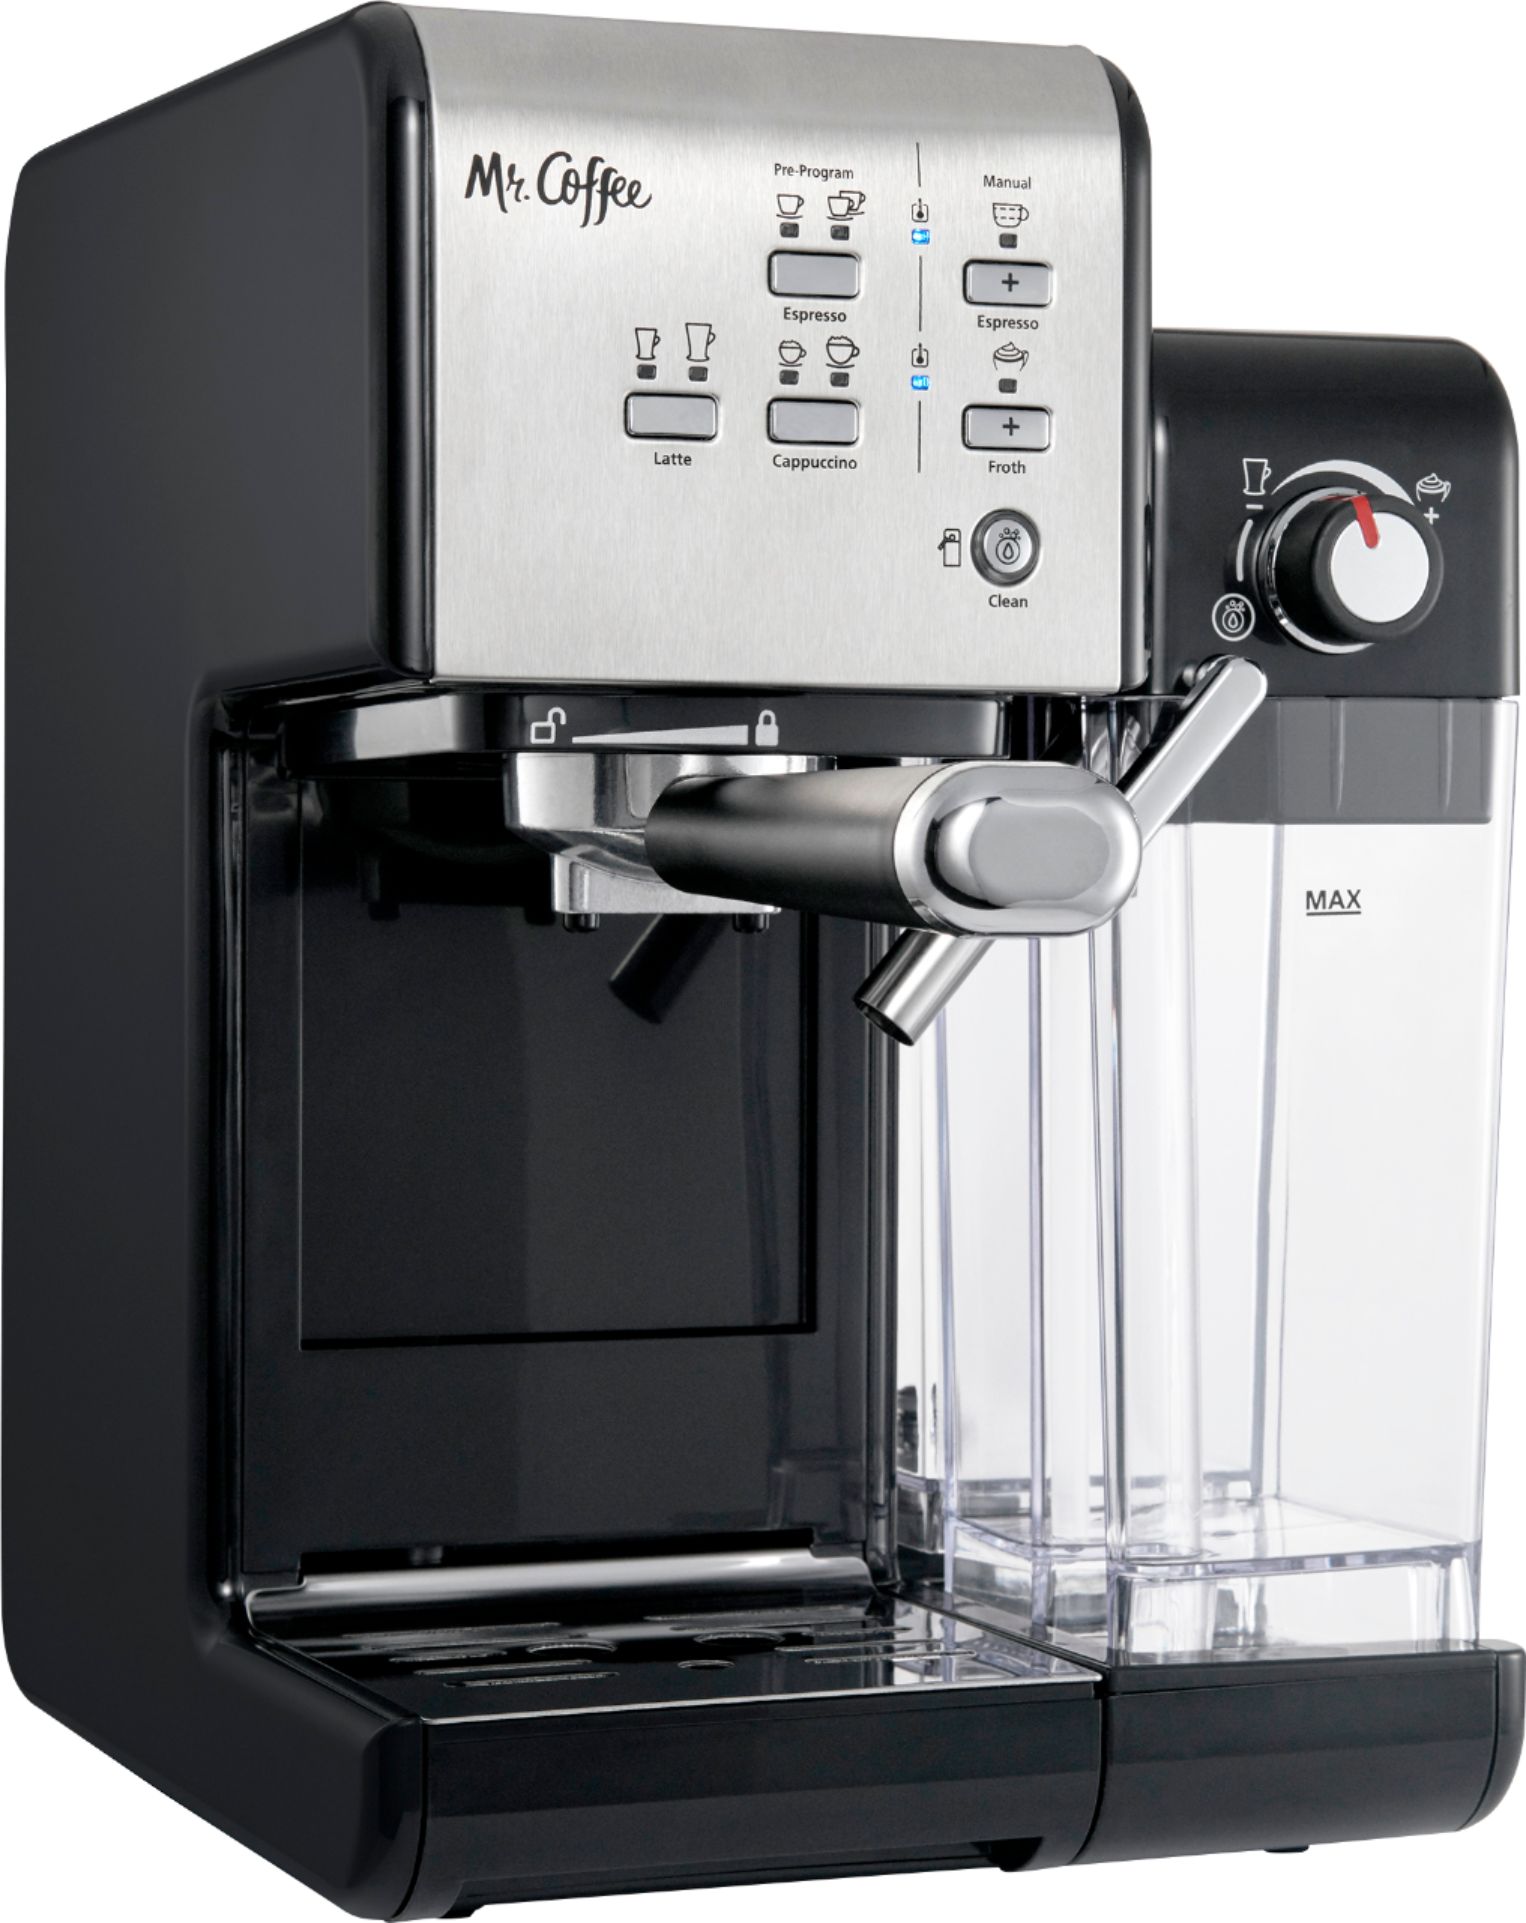 Angle View: Mr. Coffee - Espresso Machine with 19 bars of pressure and Milk Frother - Stainless Steel